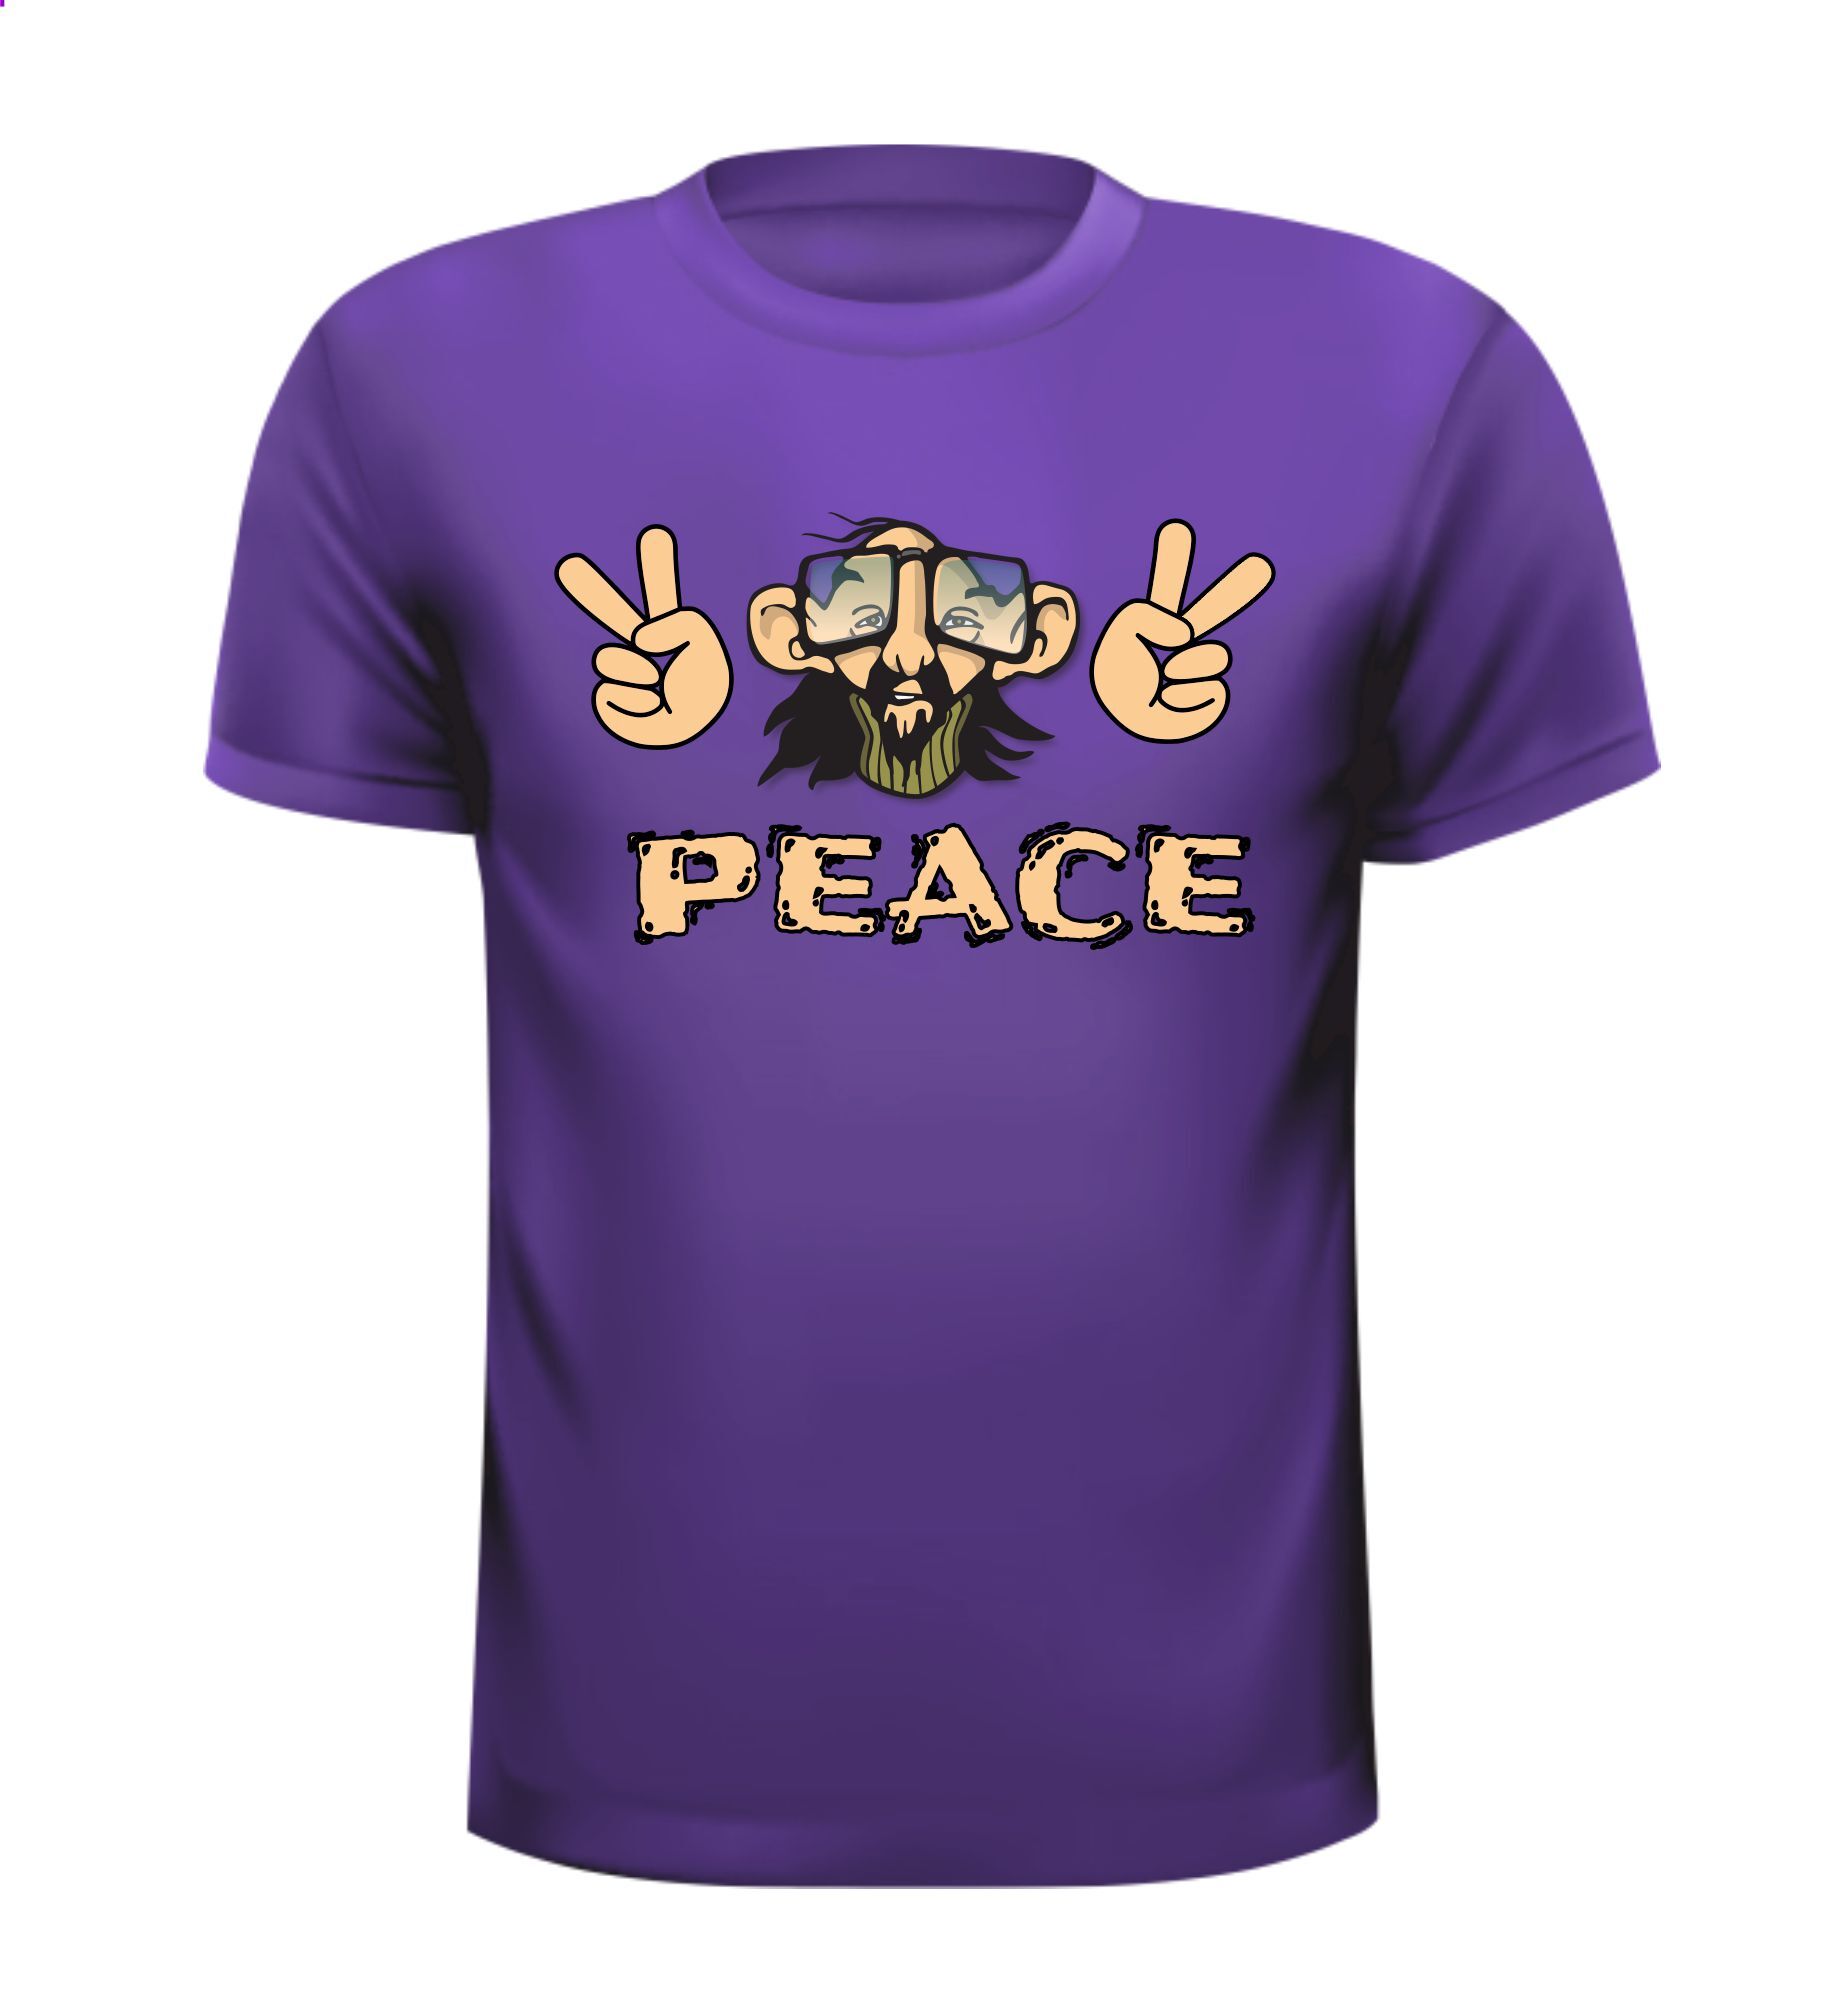 T-shirt peace hippie seventies vrede